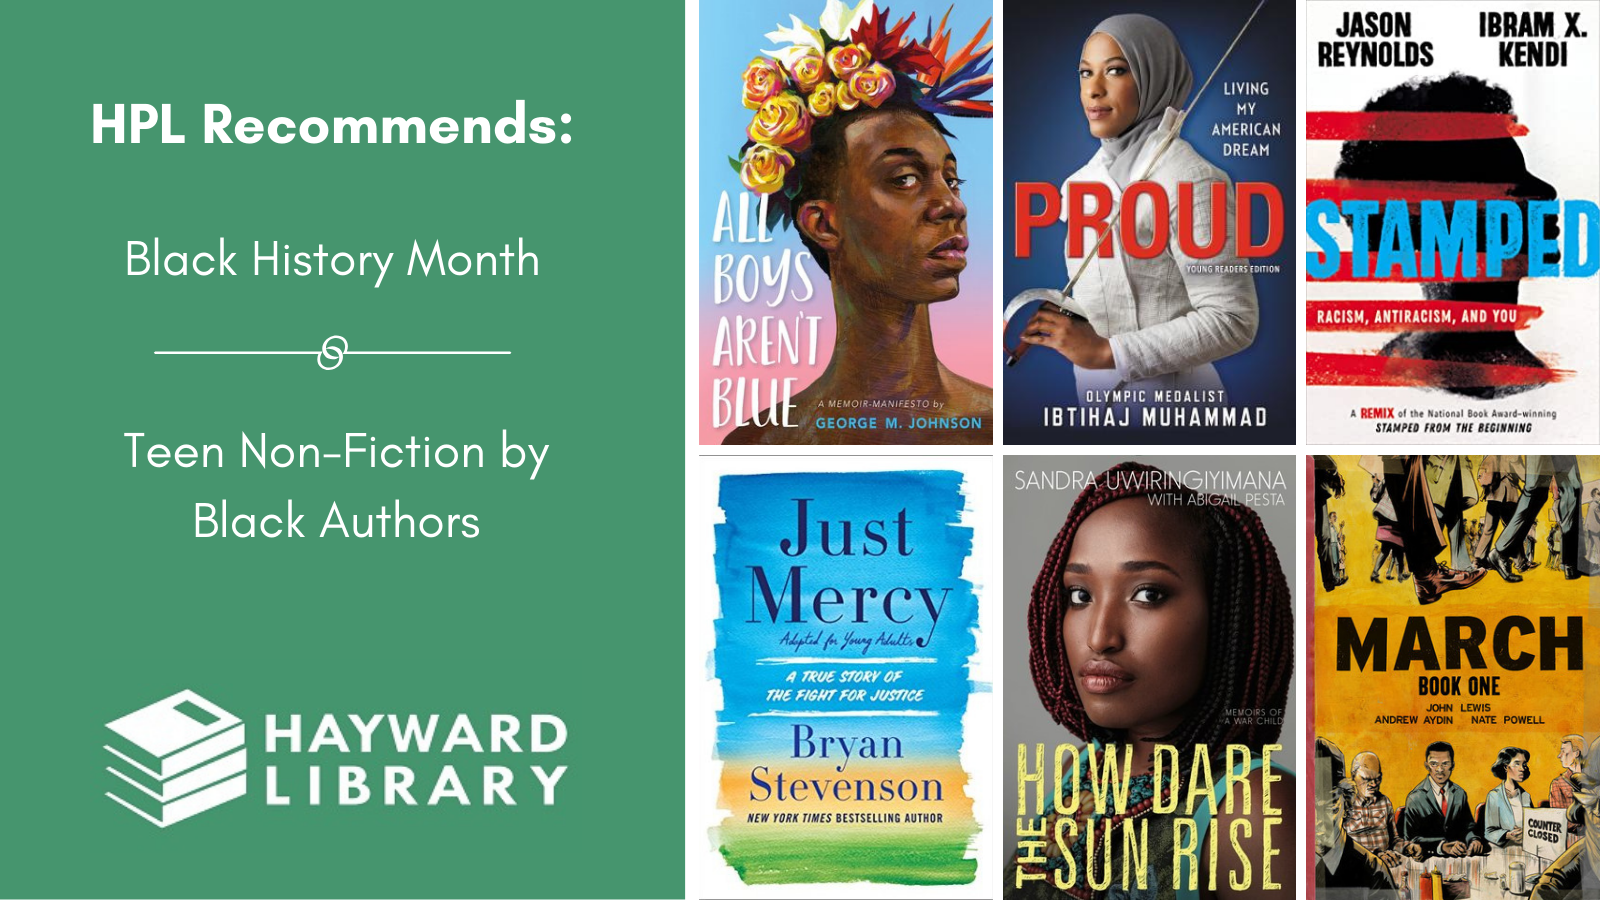 Collage of book covers with a green block on left side that says HPL Recommends, Black History Month, Teen-Fiction by Black Authors in white text, with Hayward Library logo below it.